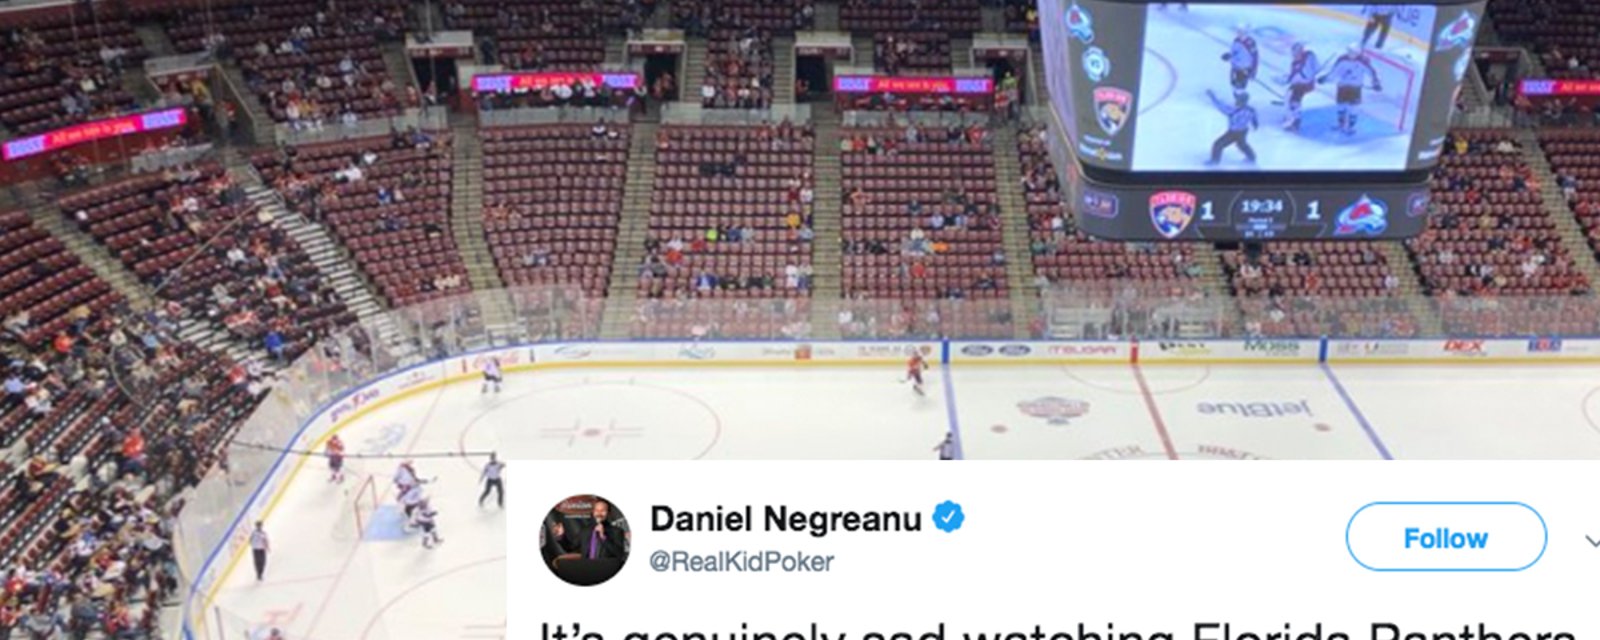 Panthers continue to set embarrassing lows in attendance